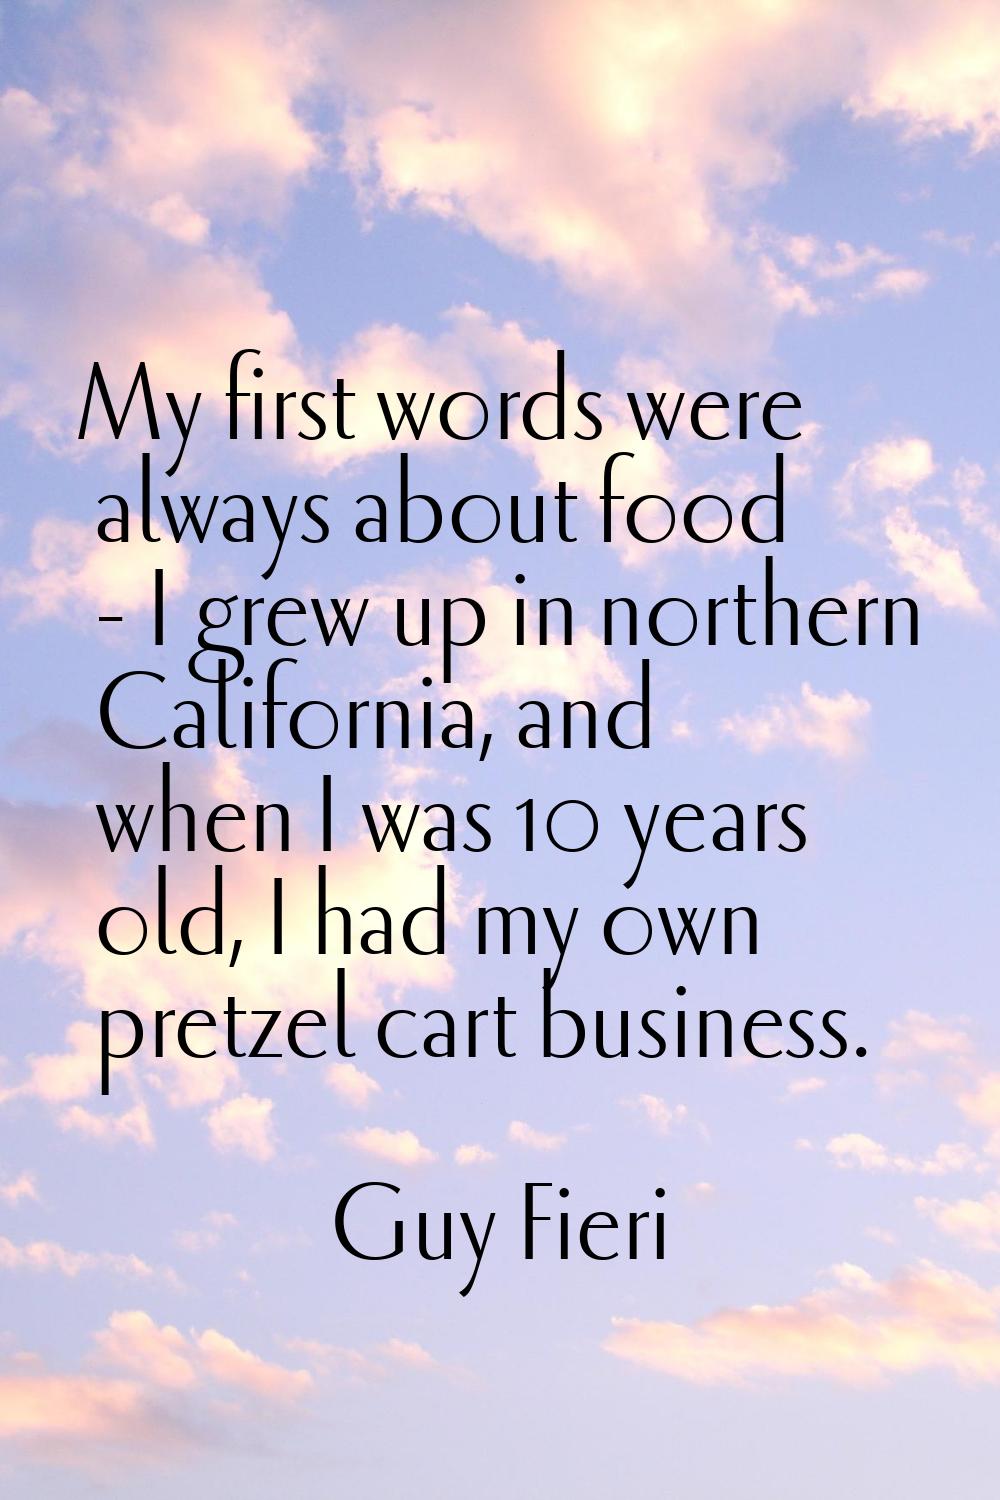 My first words were always about food - I grew up in northern California, and when I was 10 years o